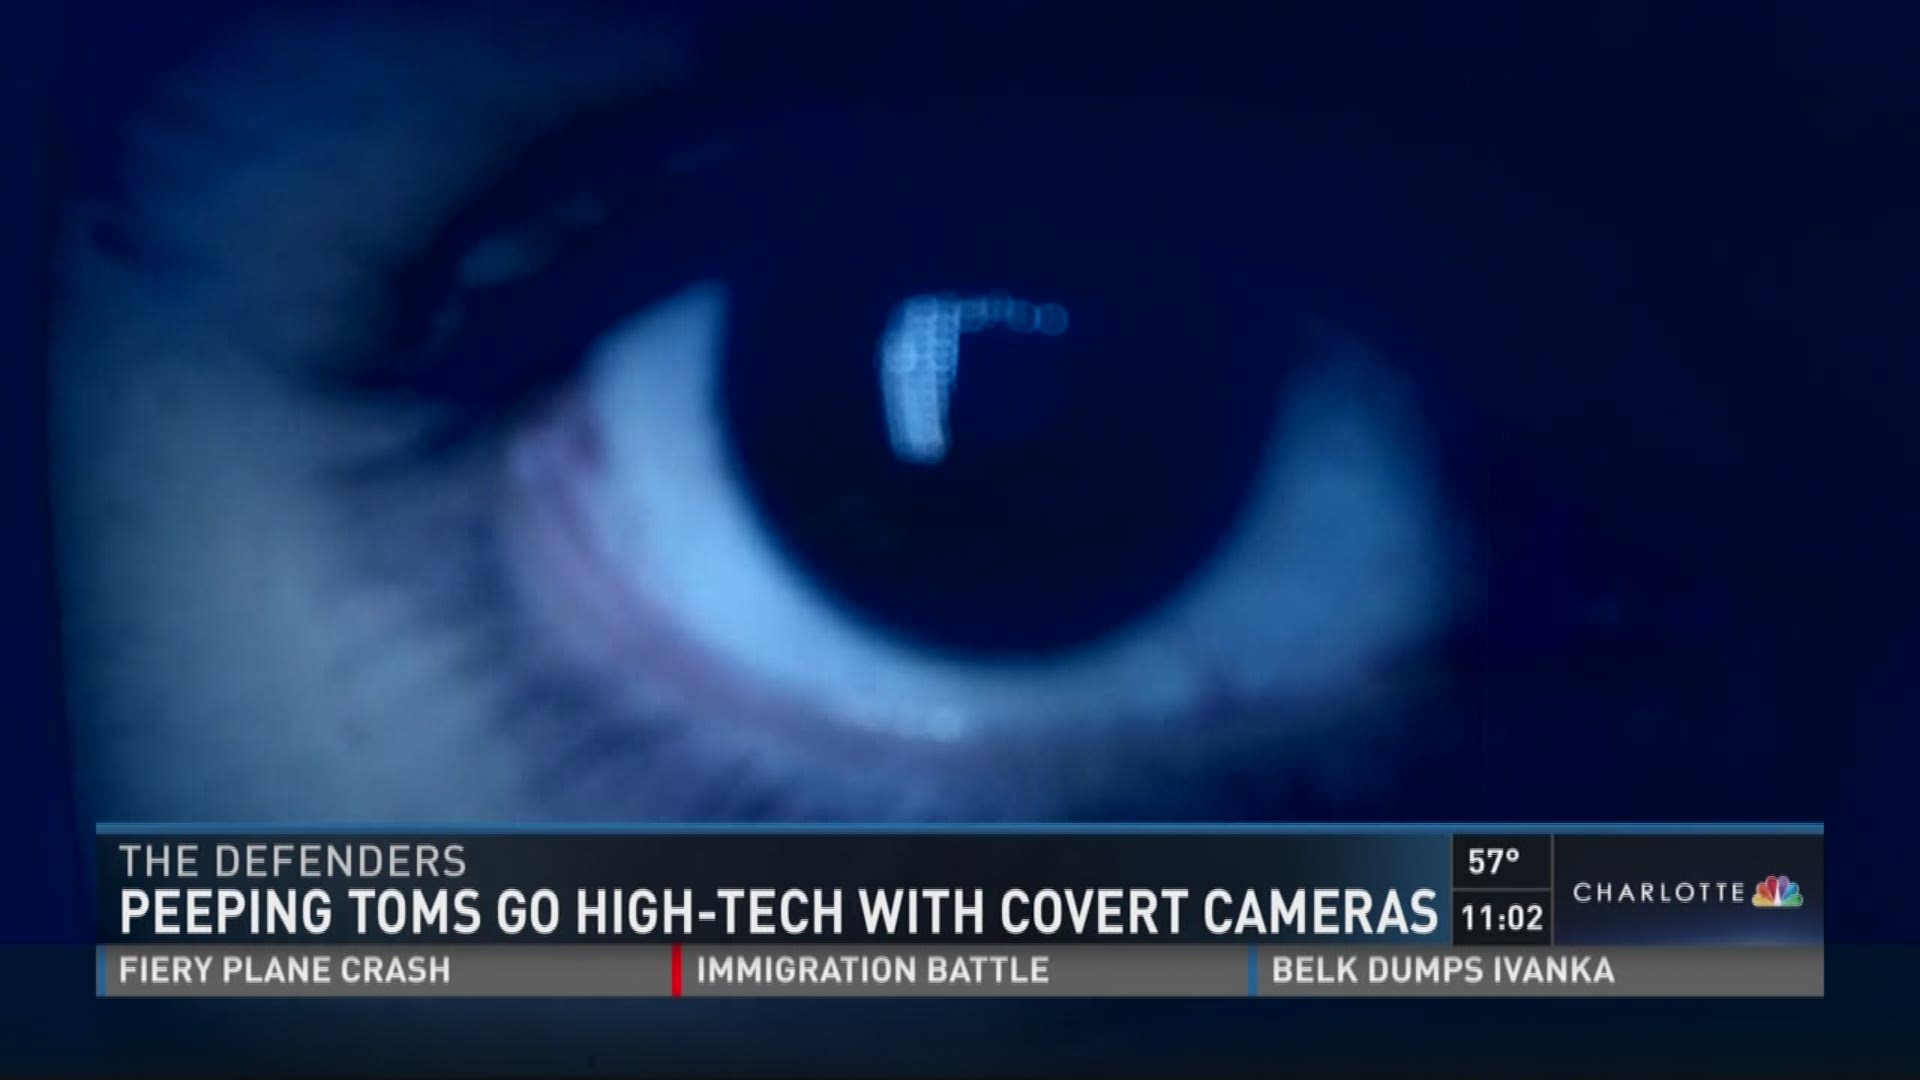 You would never know it was there Peeping Toms go high-tech with covert cameras wcnc image